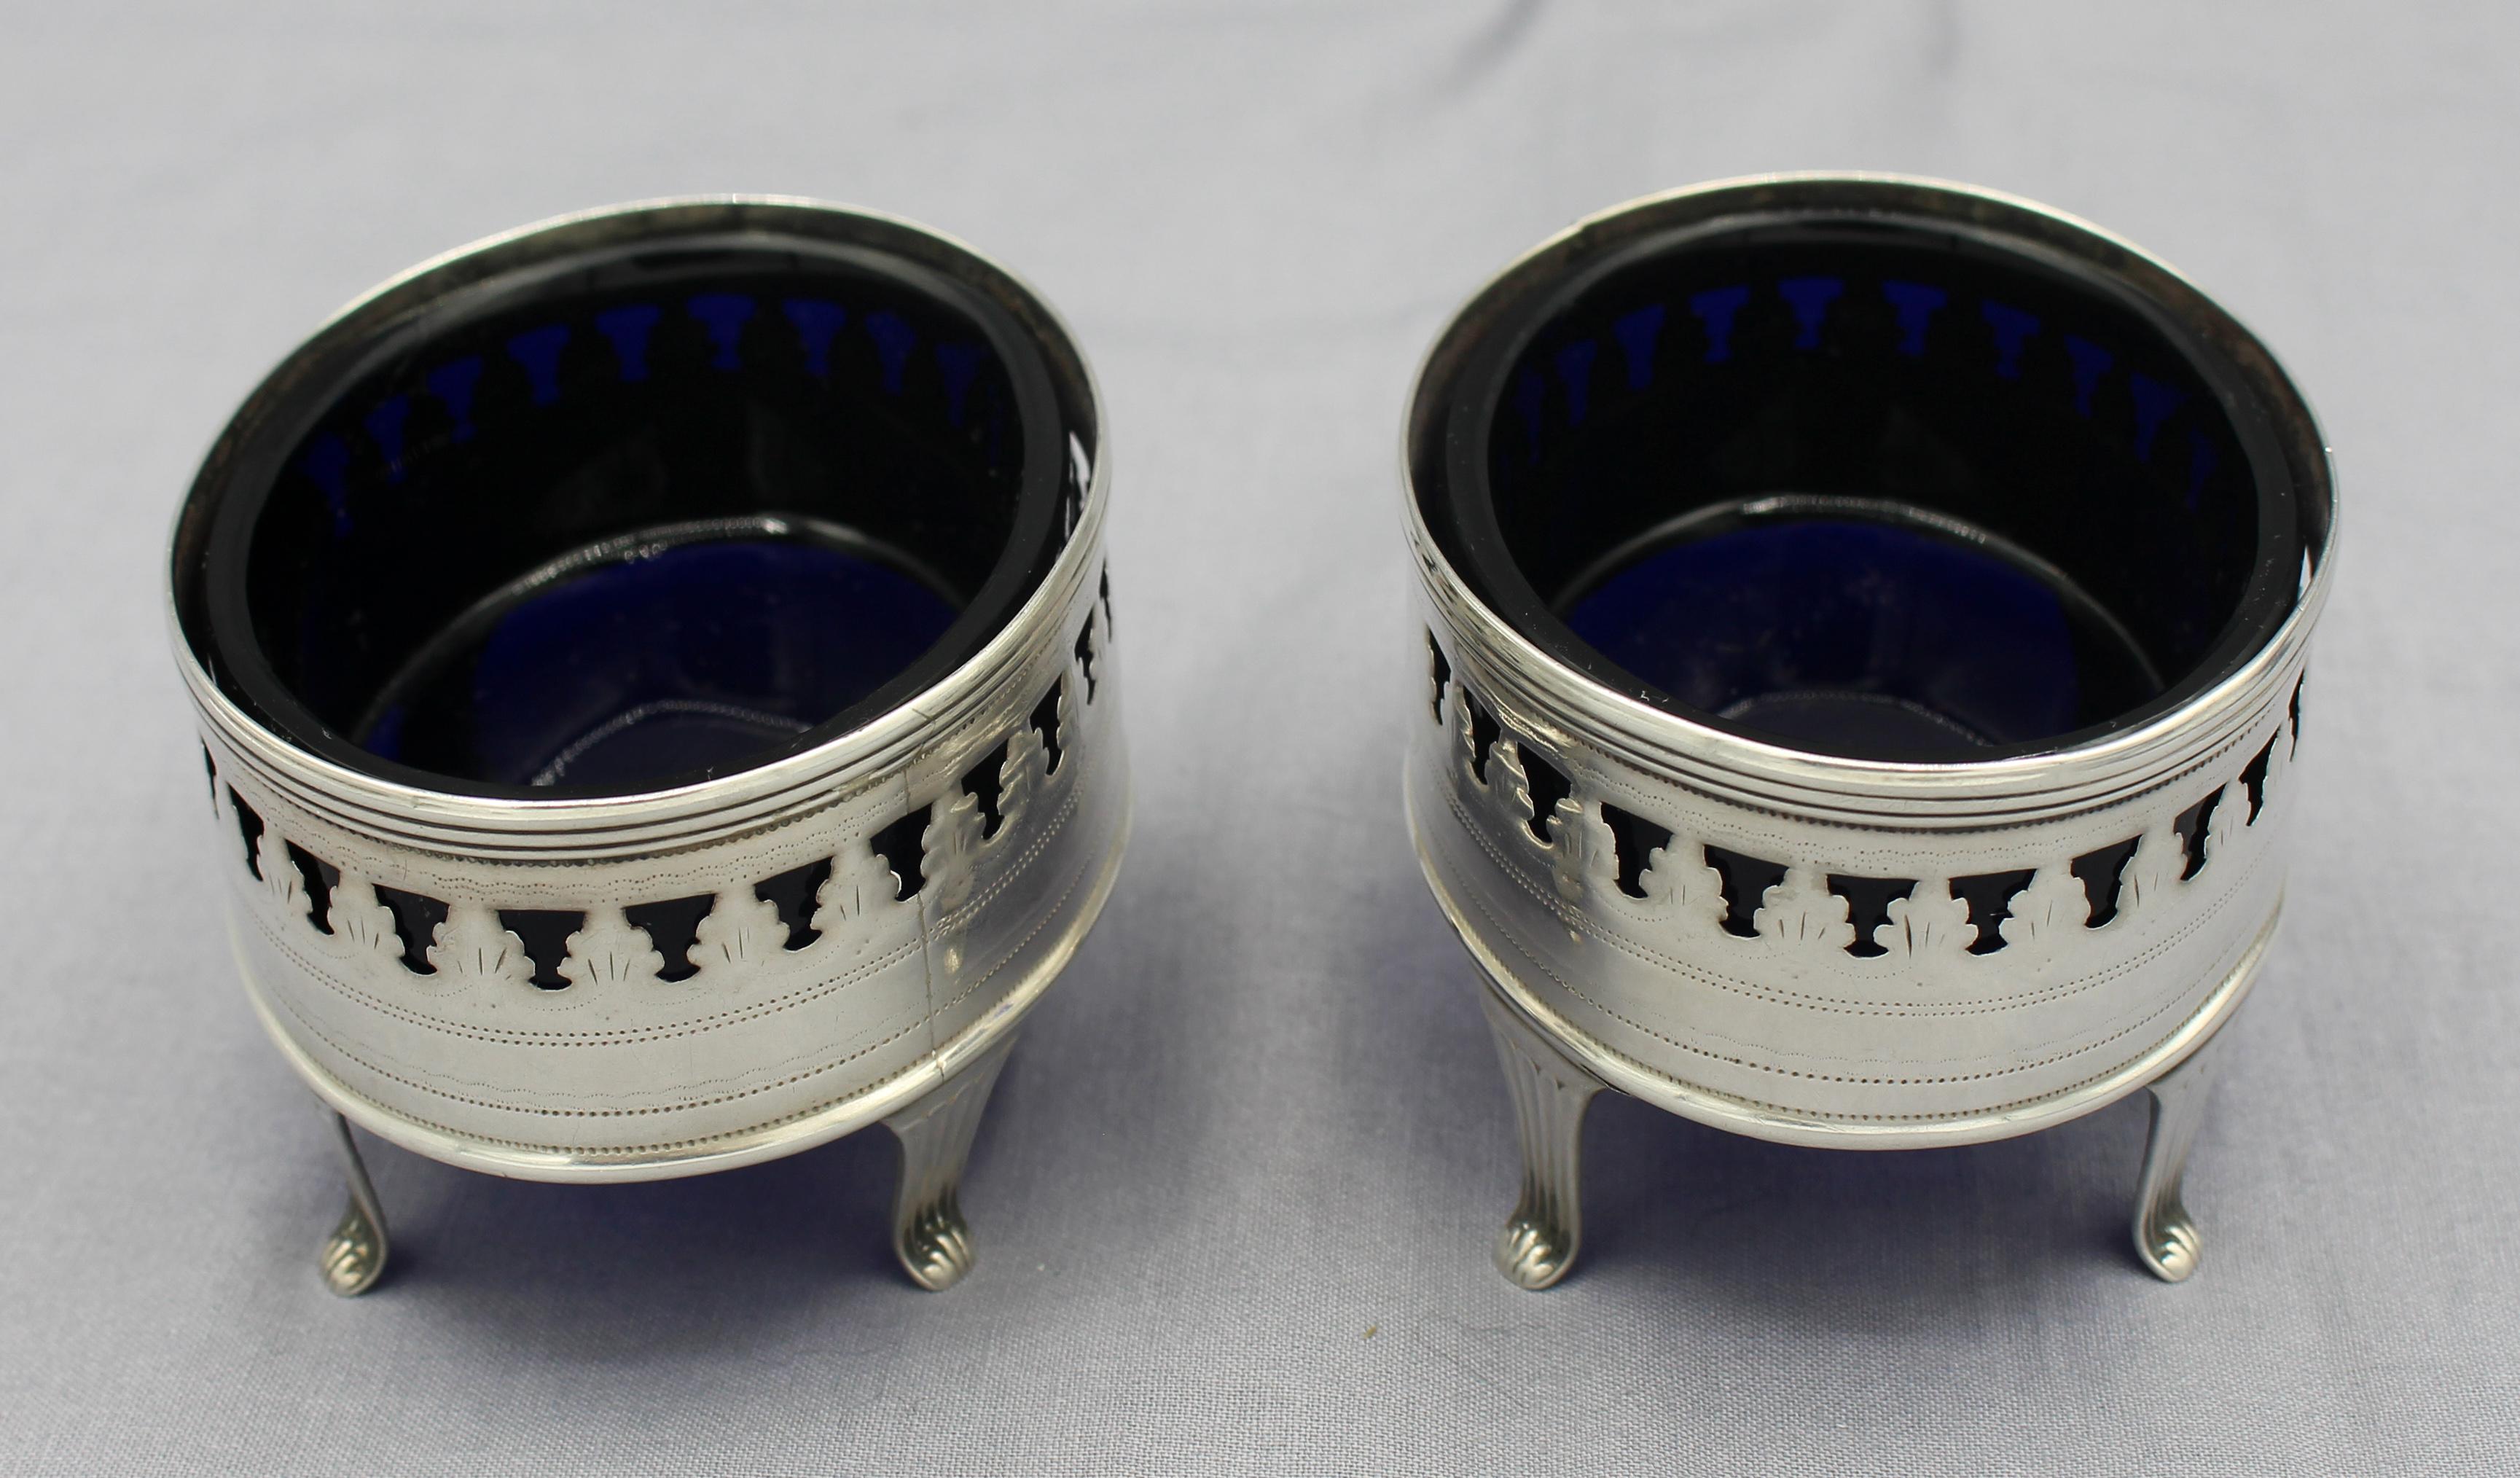 Pair of sterling silver oval master salts by Peter & Ann Bateman, London, 1797. Cobalt glass liners. Elegantly pierced; neoclassical design typical of the Bateman family work. Scrolling monograms. Raised on four downswept legs to scrolled feet. Seam